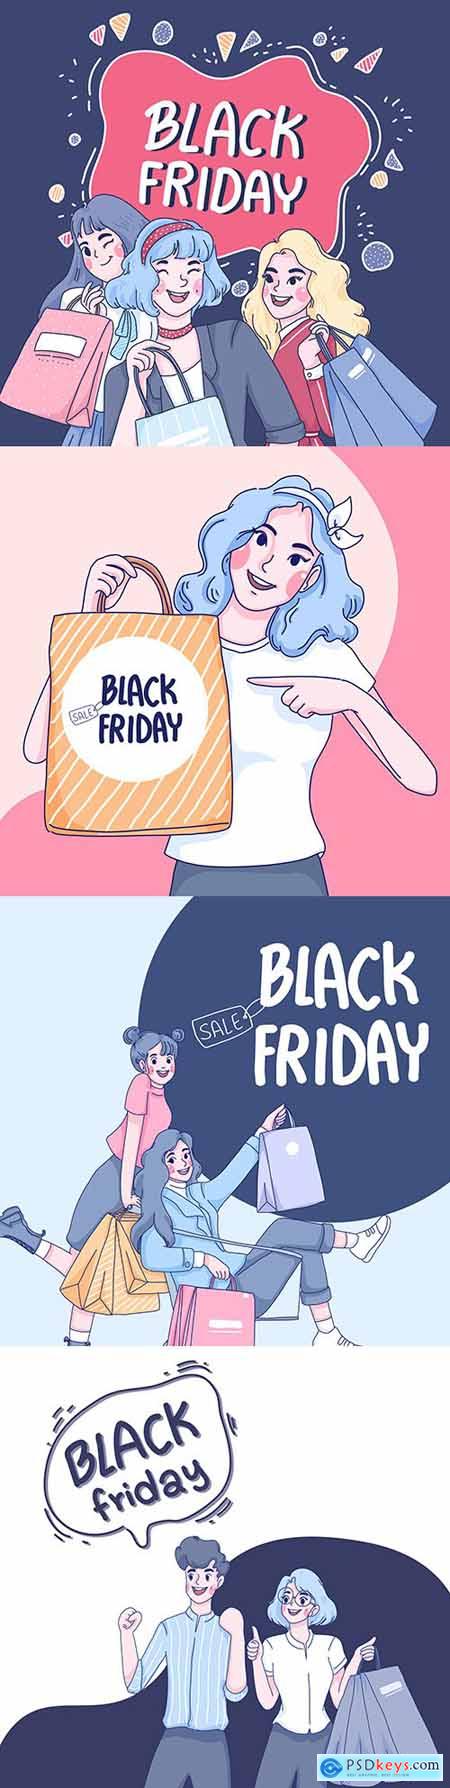 Black Friday and sale special girls with purchases illustration